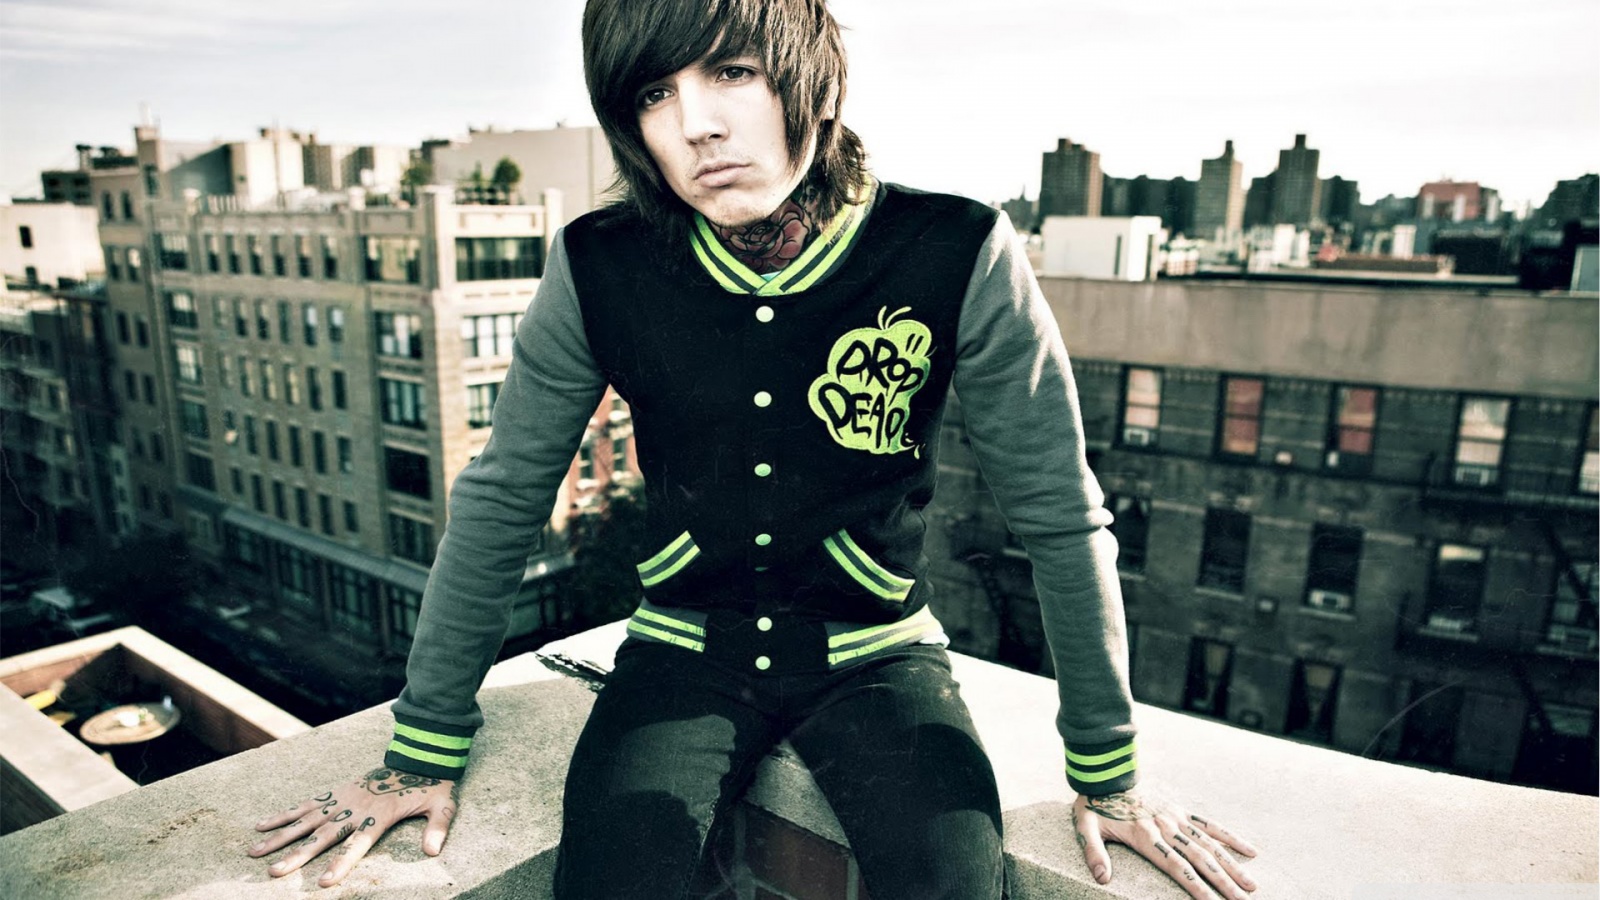 Oliver Sykes Wallpapers - Wallpaper Cave